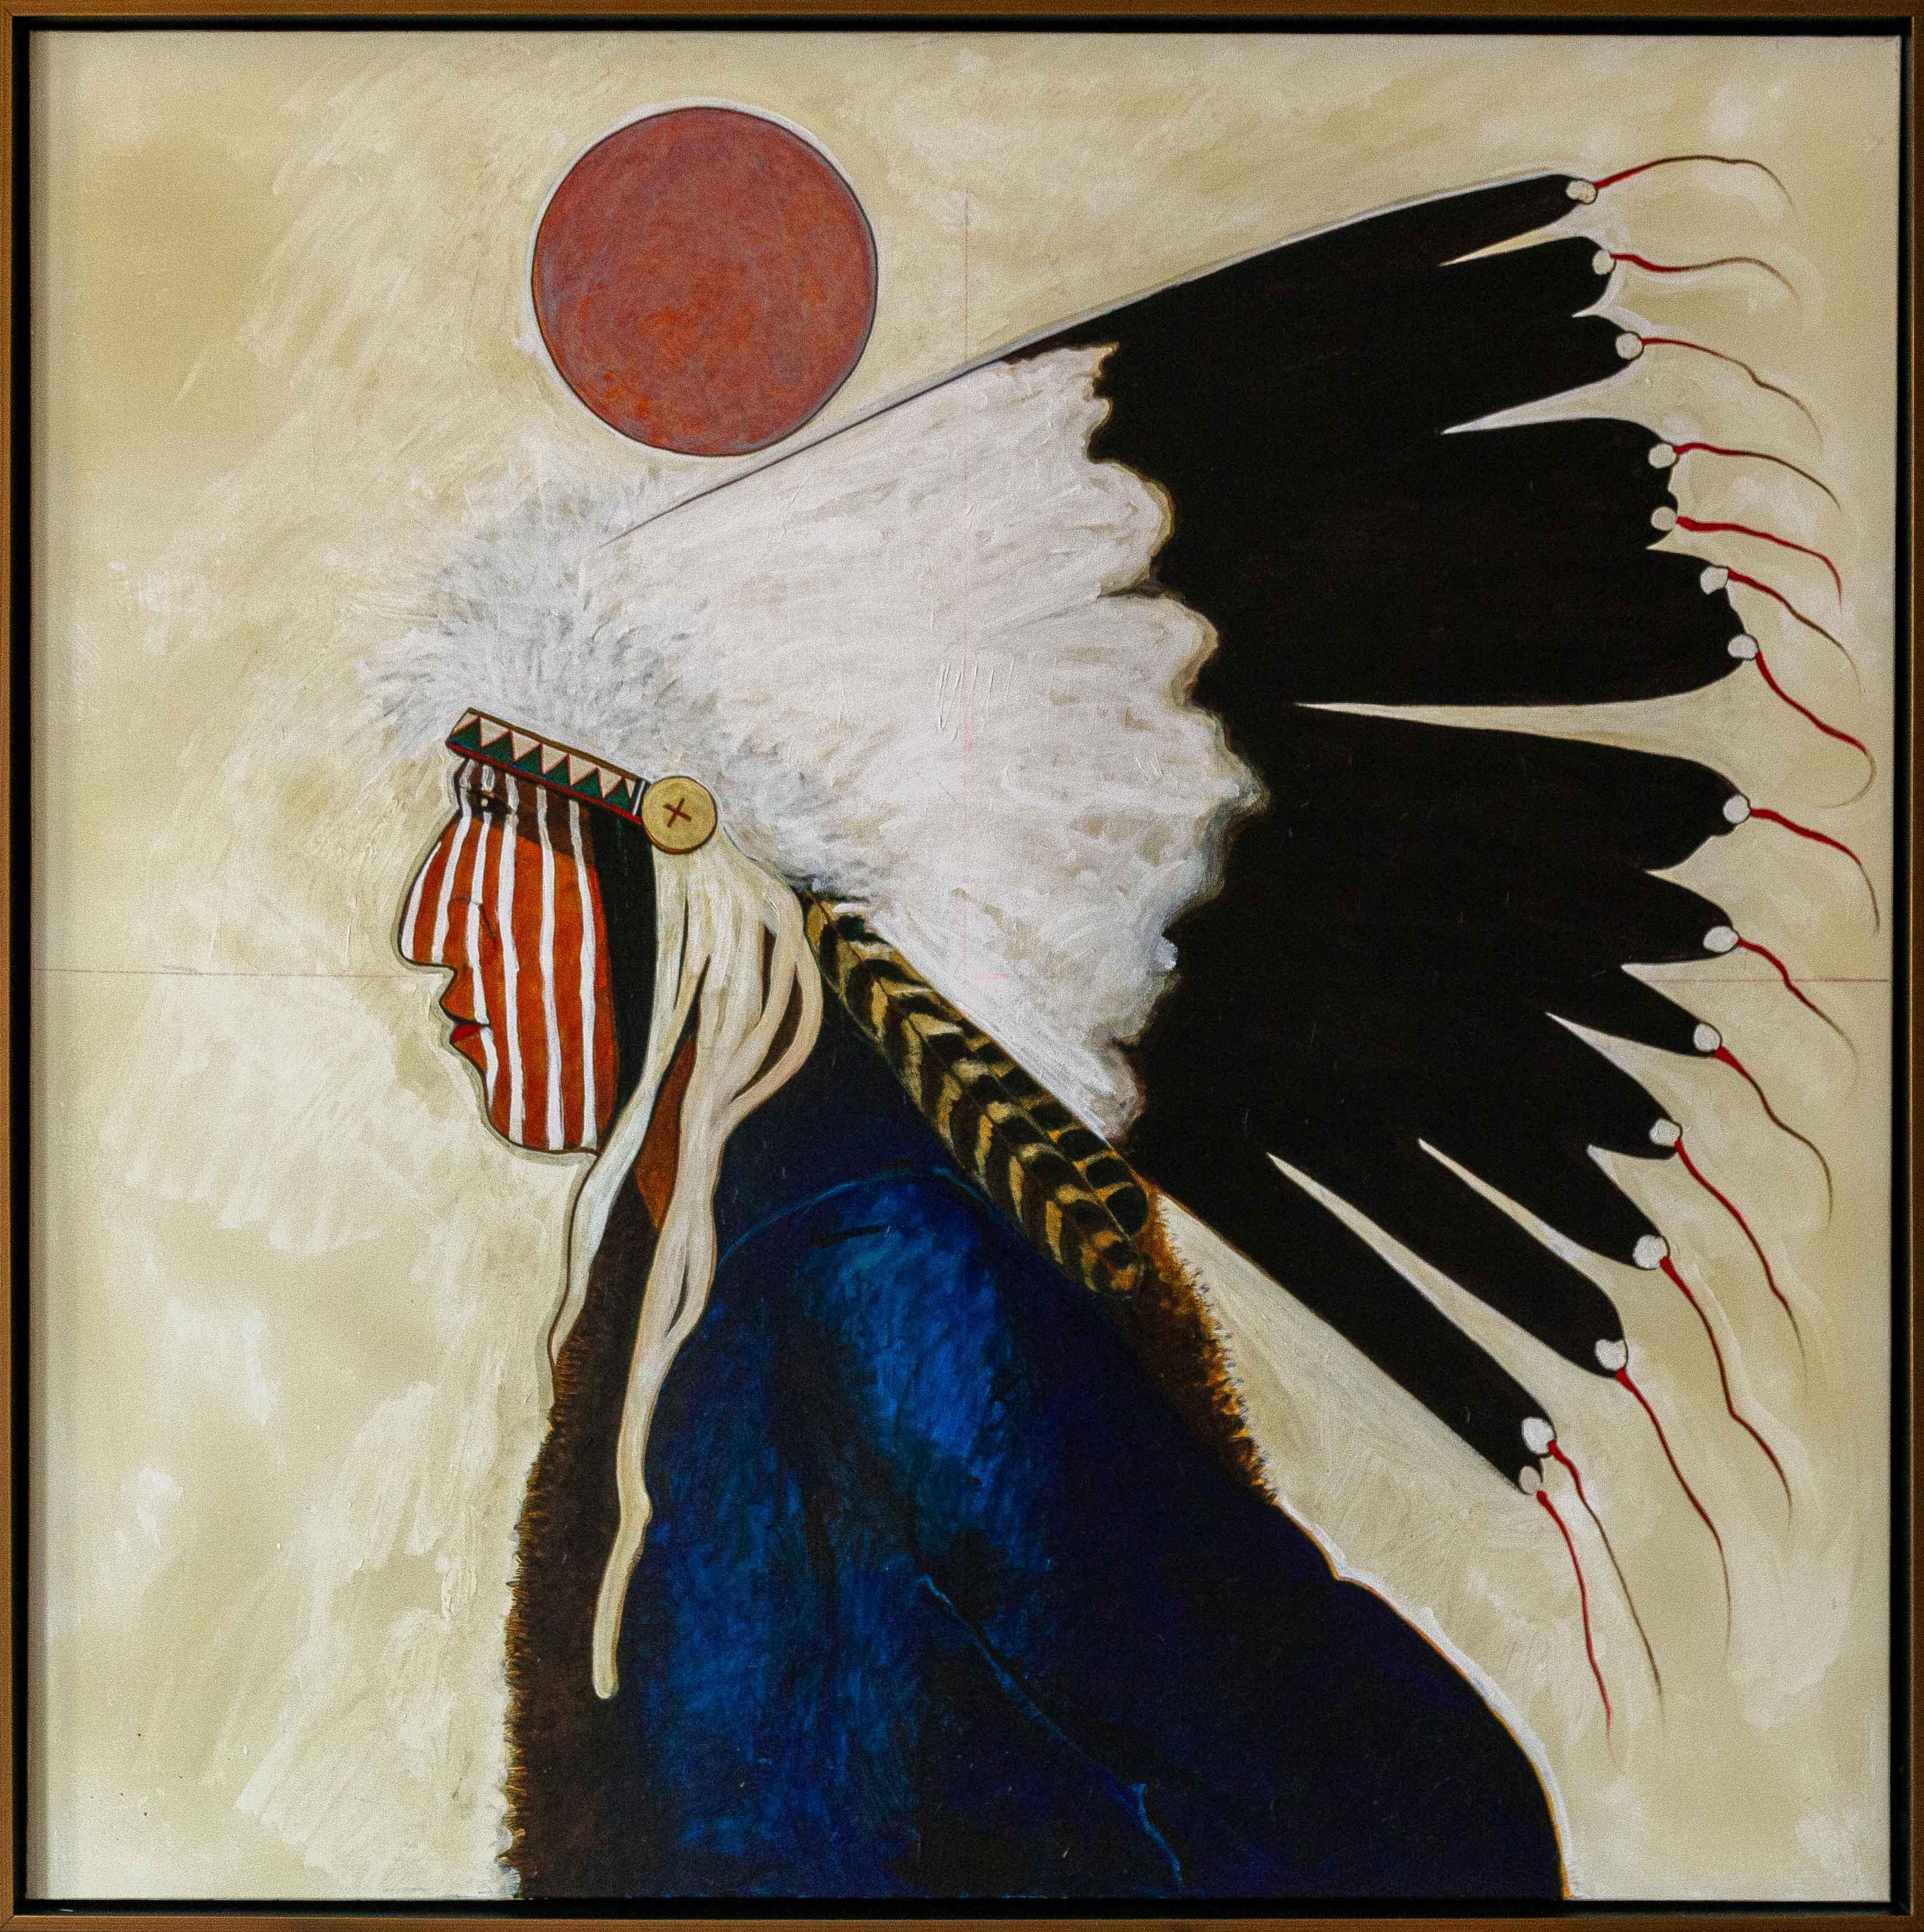 "Morning Fog" by Kevin Red Star. This painting depicts a Crow Elder Chief. He was a well-loved and benevolent leader; known for his bravery. Acrylic, Mixed Media on Canvas, 48" x 48", 51" x 51" (framed).
Kevin Red Star’s art is honored throughout